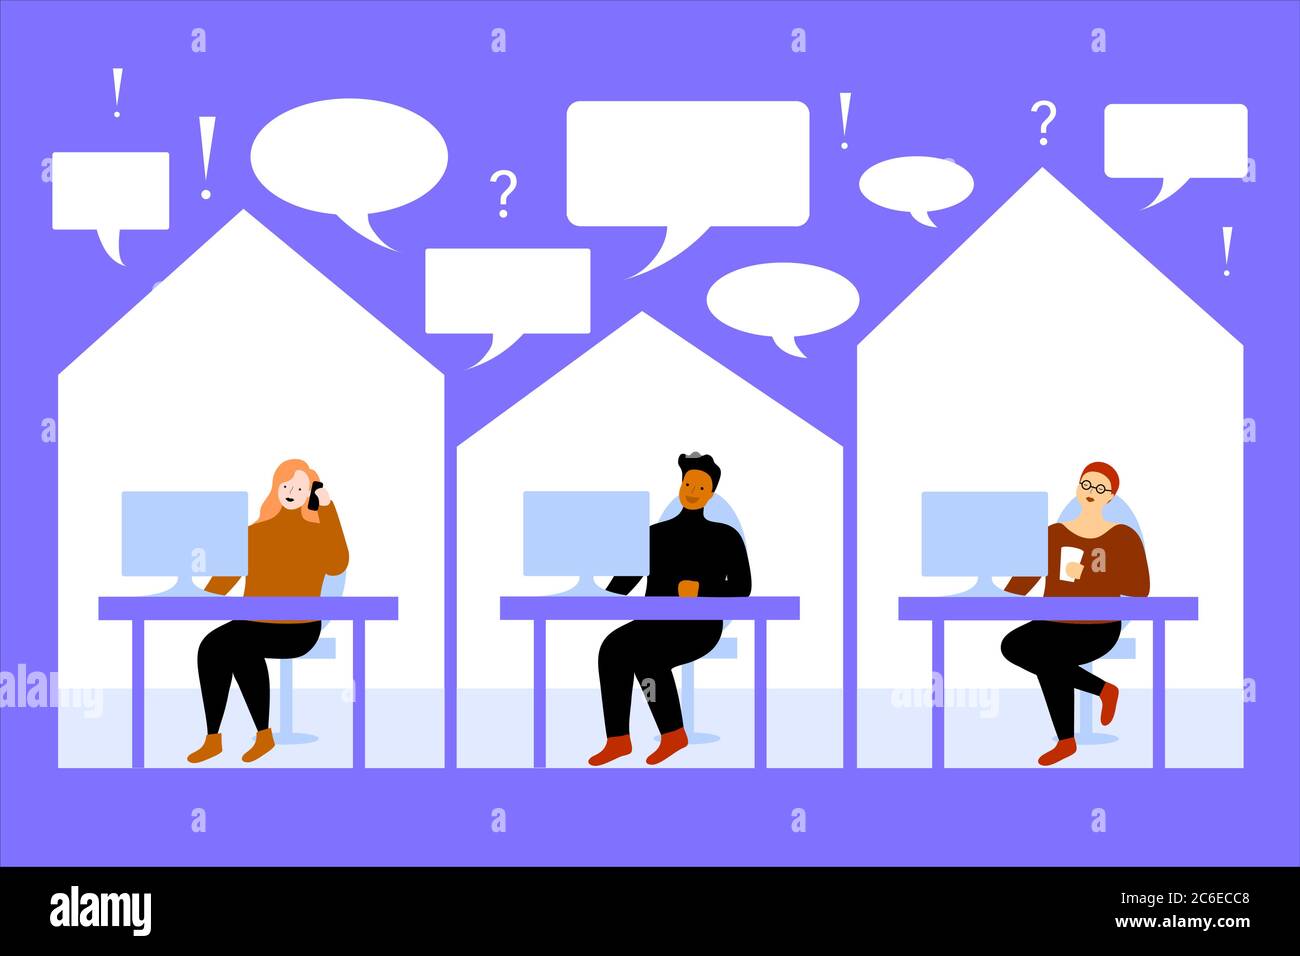 Working safely at home with colleagues. Social distancing. Home office. Coronavirus or COVID-19 Prevention concept. Vector illustration. Stock Vector